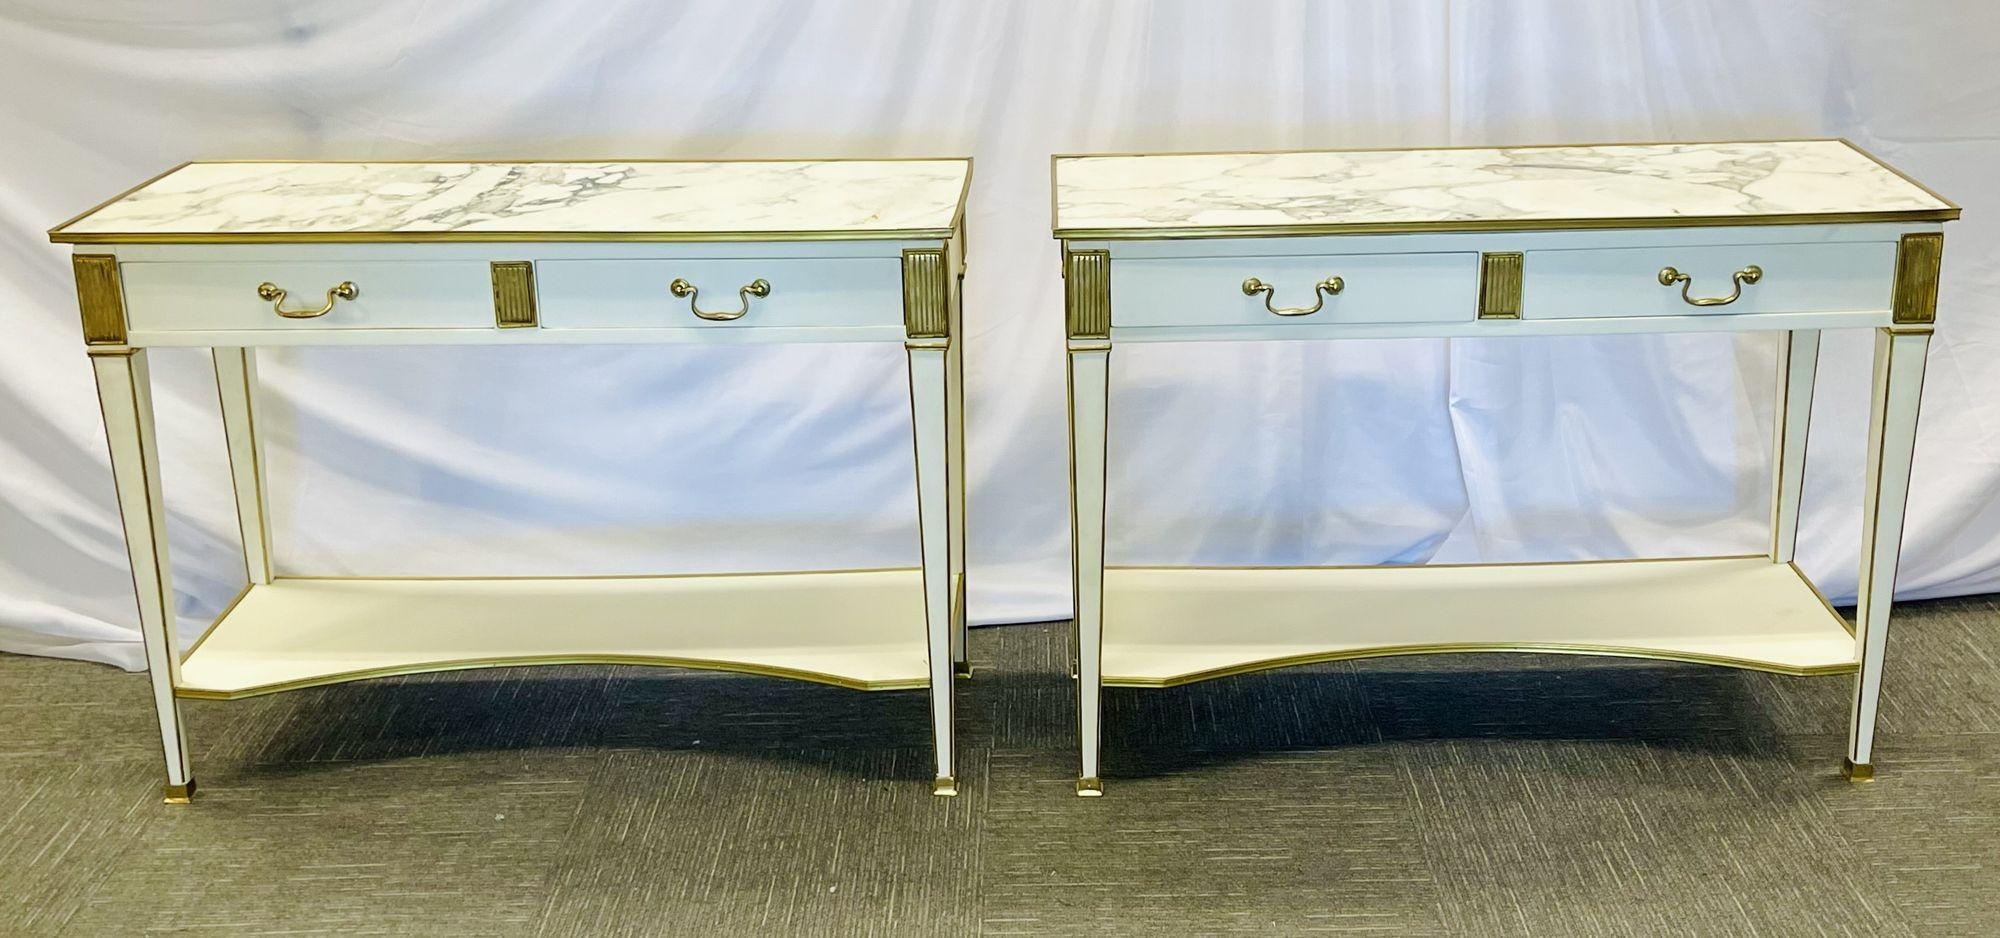 Pair of Hollywood Regency Neoclassical White Sofa or Console Tables, Sideboards or Serving Tables, Manner of Maison Jansen
This very versatile Pair of Hollywood Regency neoclassical white paint decorated console or sofa tables in the manner of